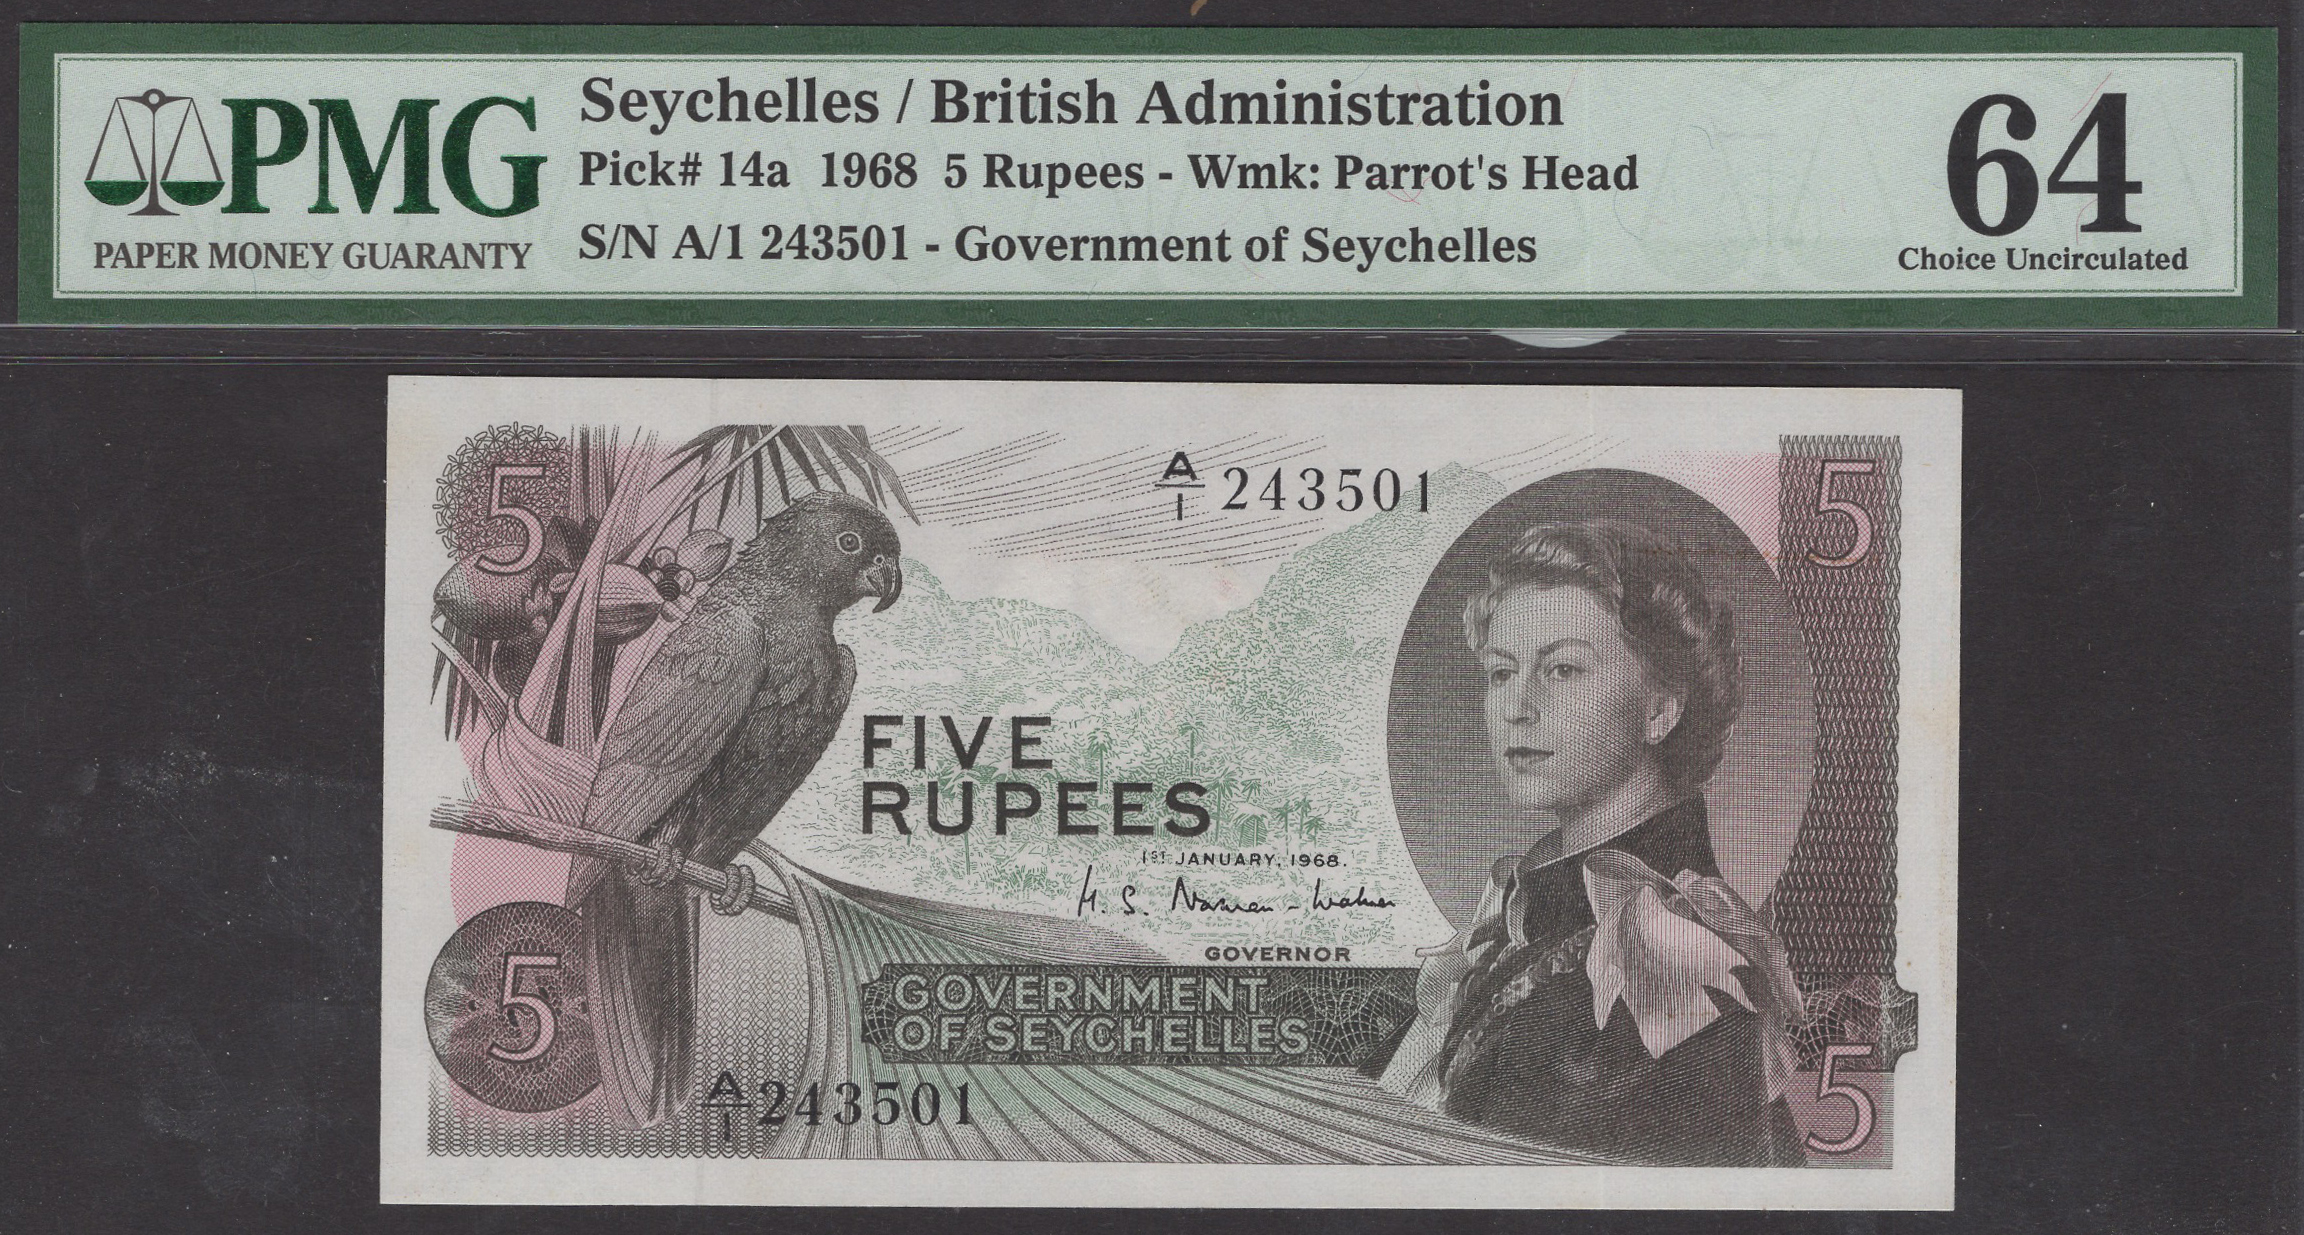 Government of Seychelles, 5 Rupees, 1 January 1968, serial number A/1 243501, in PMG holder...